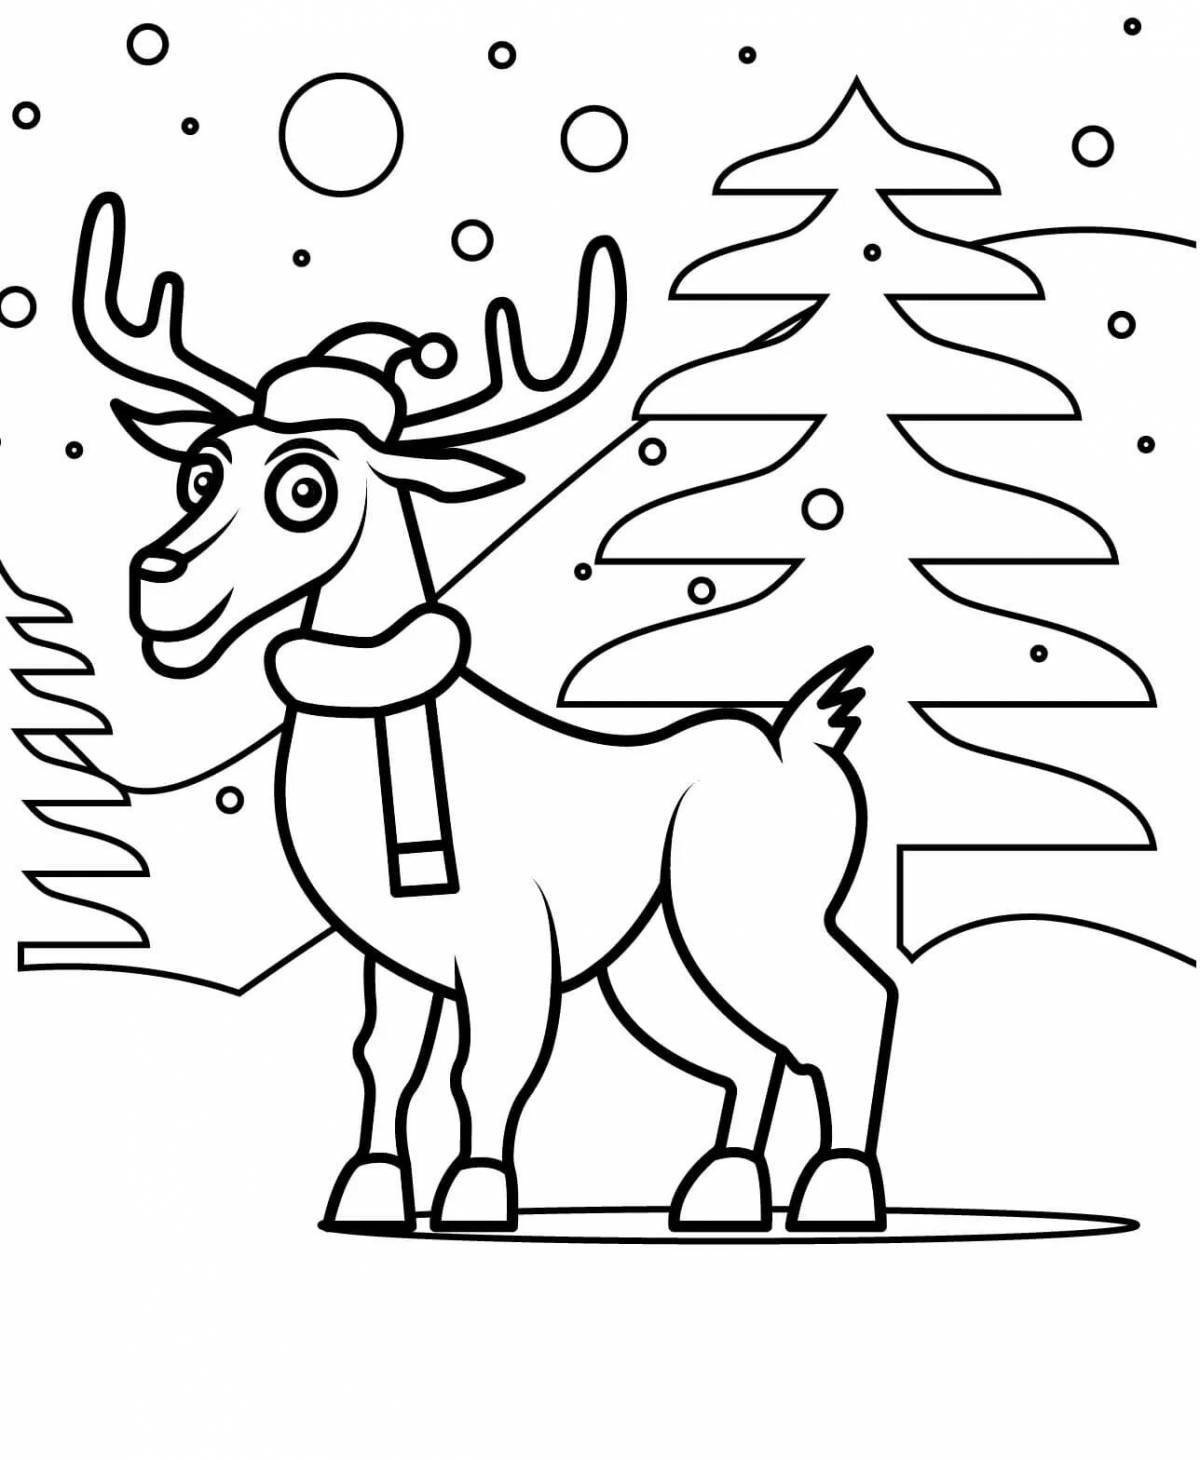 Live deer coloring pages for kids